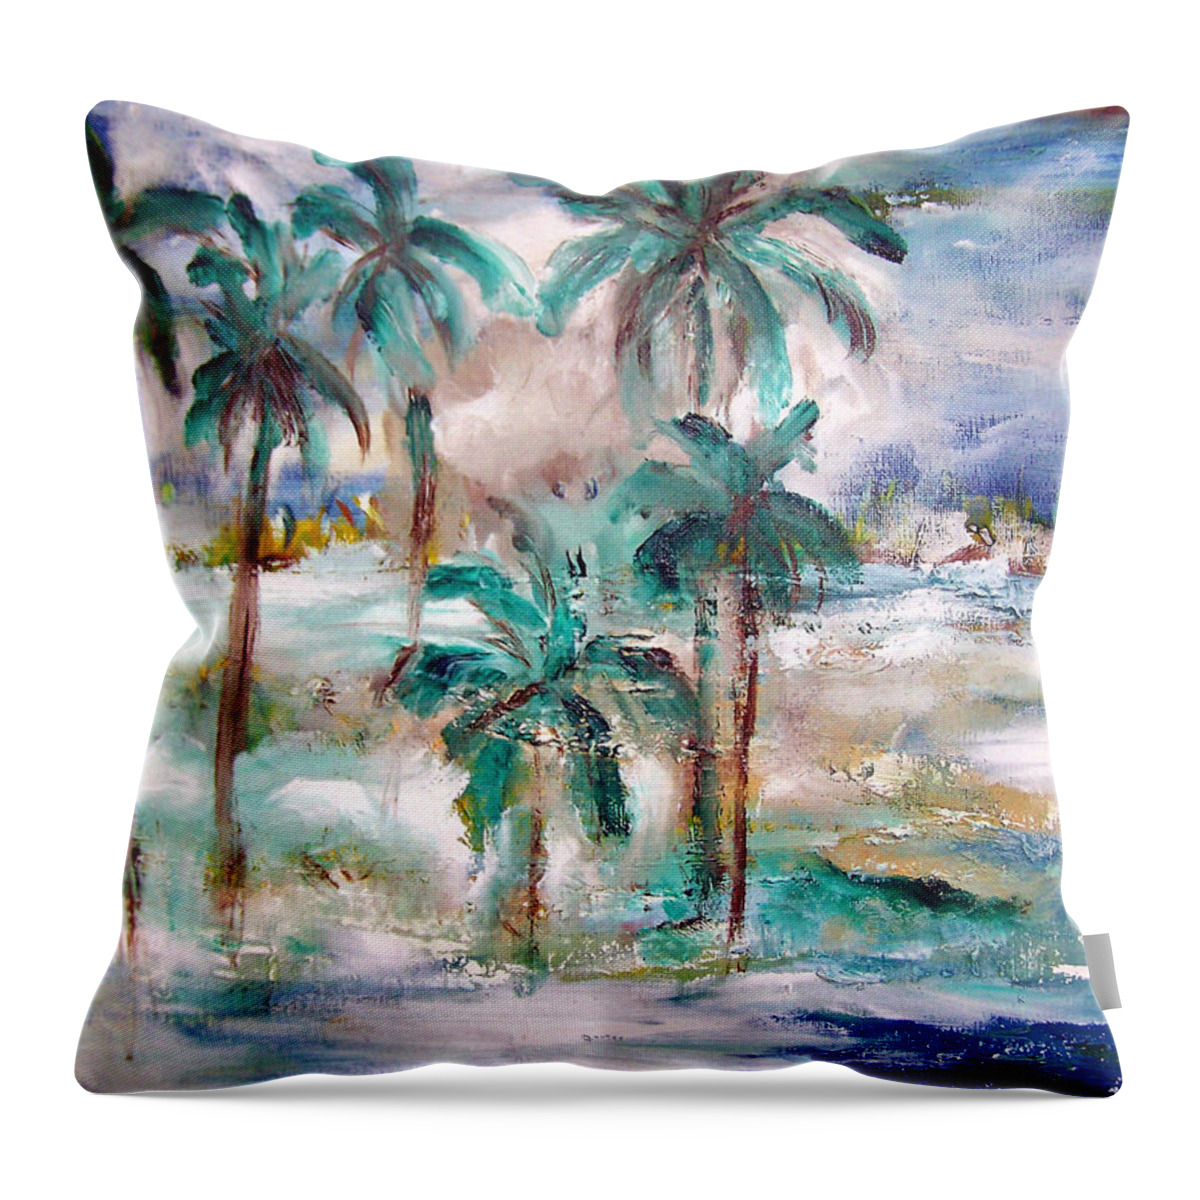 Sand Throw Pillow featuring the painting Balmy Breezy Days by Patricia Clark Taylor